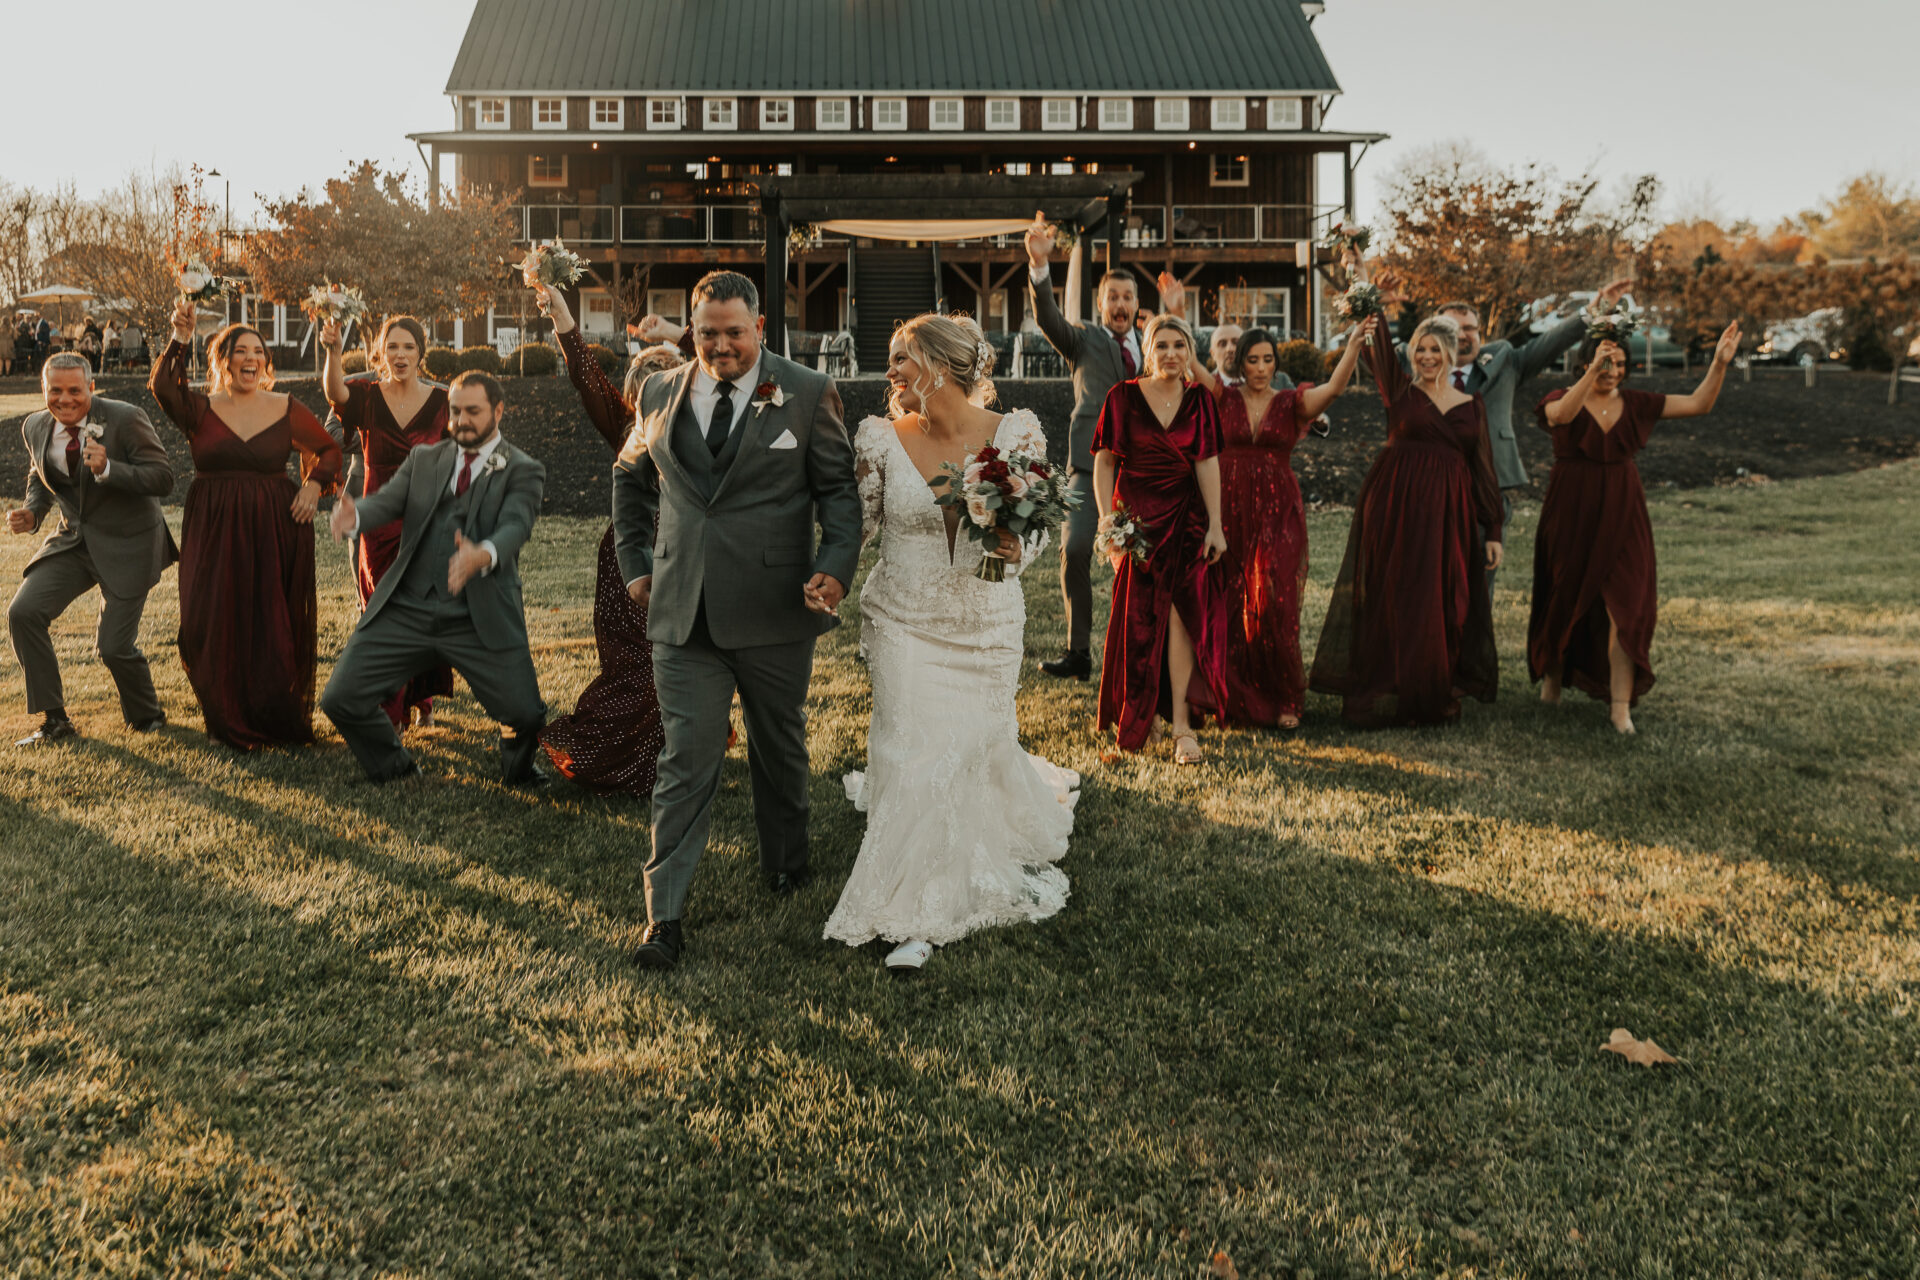 bride and groom celebrating with bridesmaids and groomsmen on field in front of rustic wedding venue